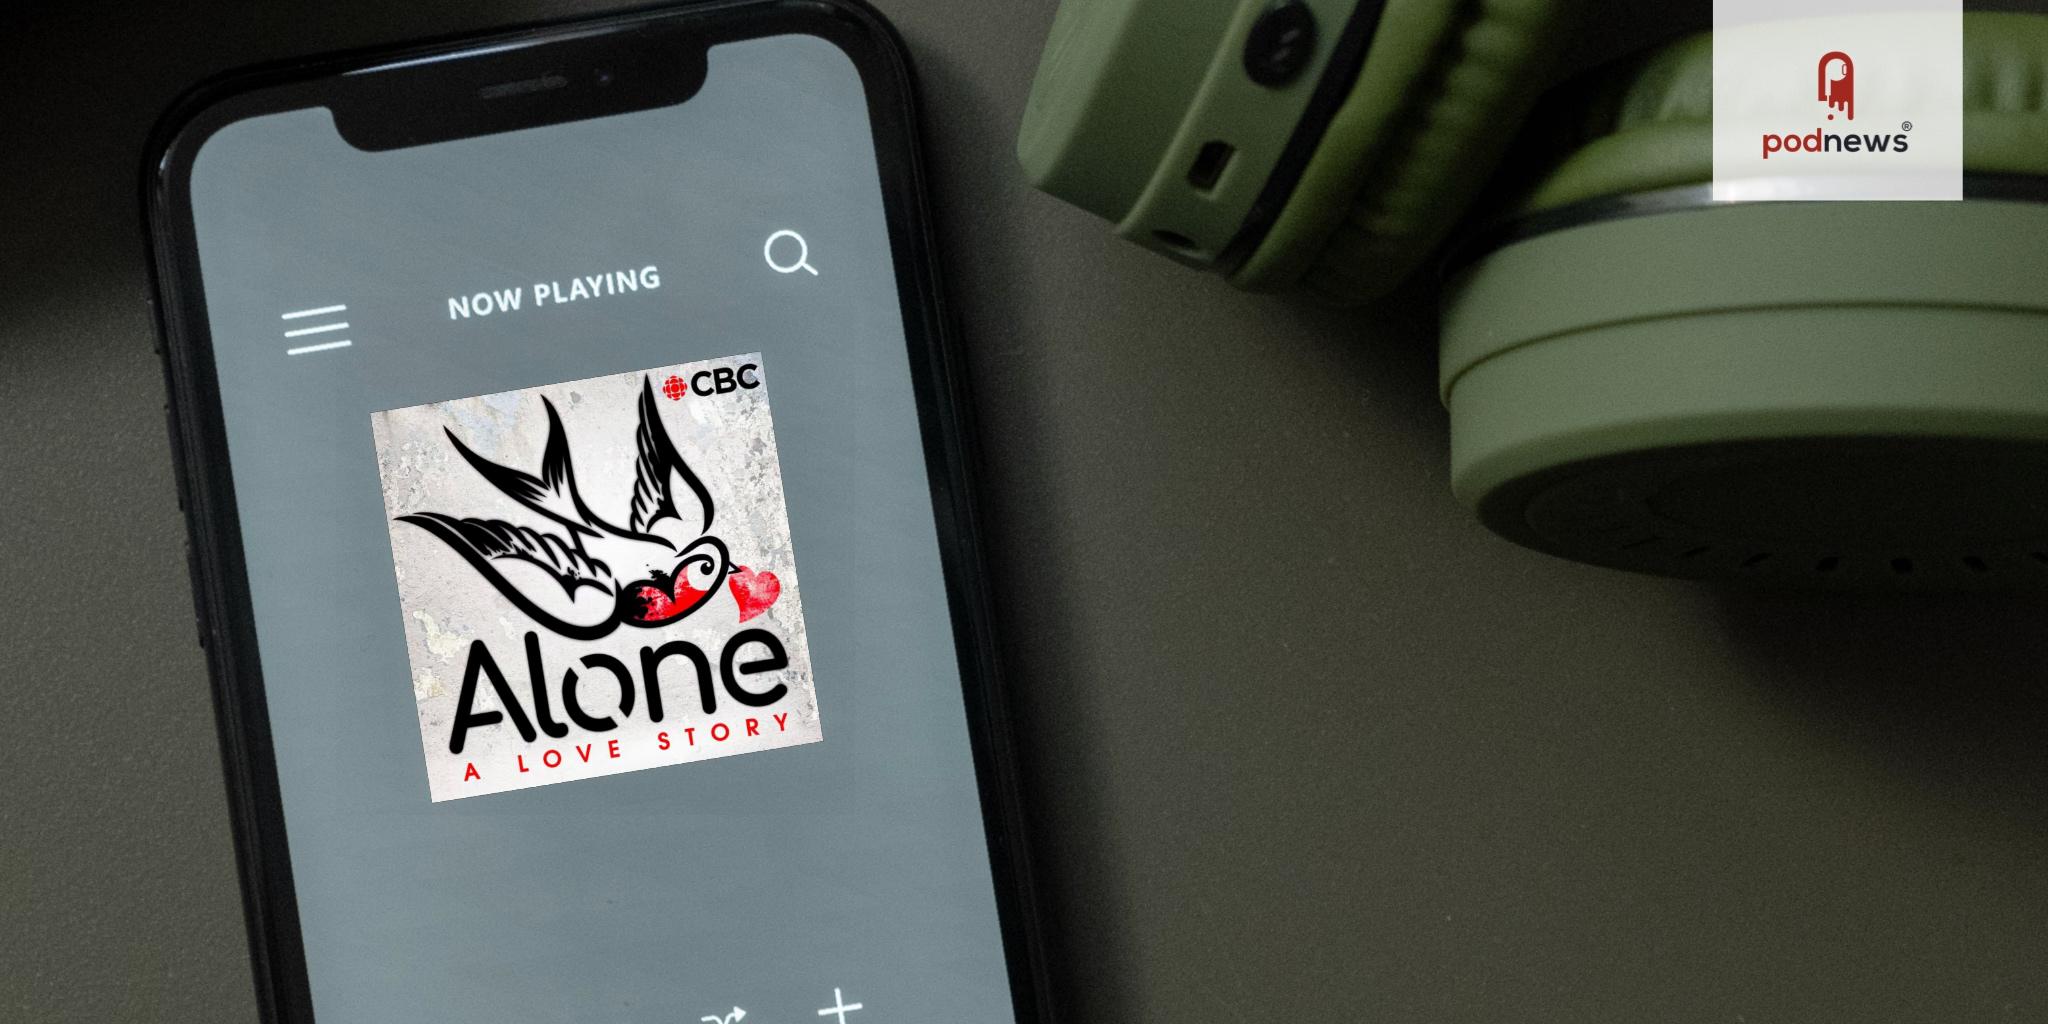 Acast and CBC collaborate to bring podcast Alone: A Love Story to new audiences in French and Spanish